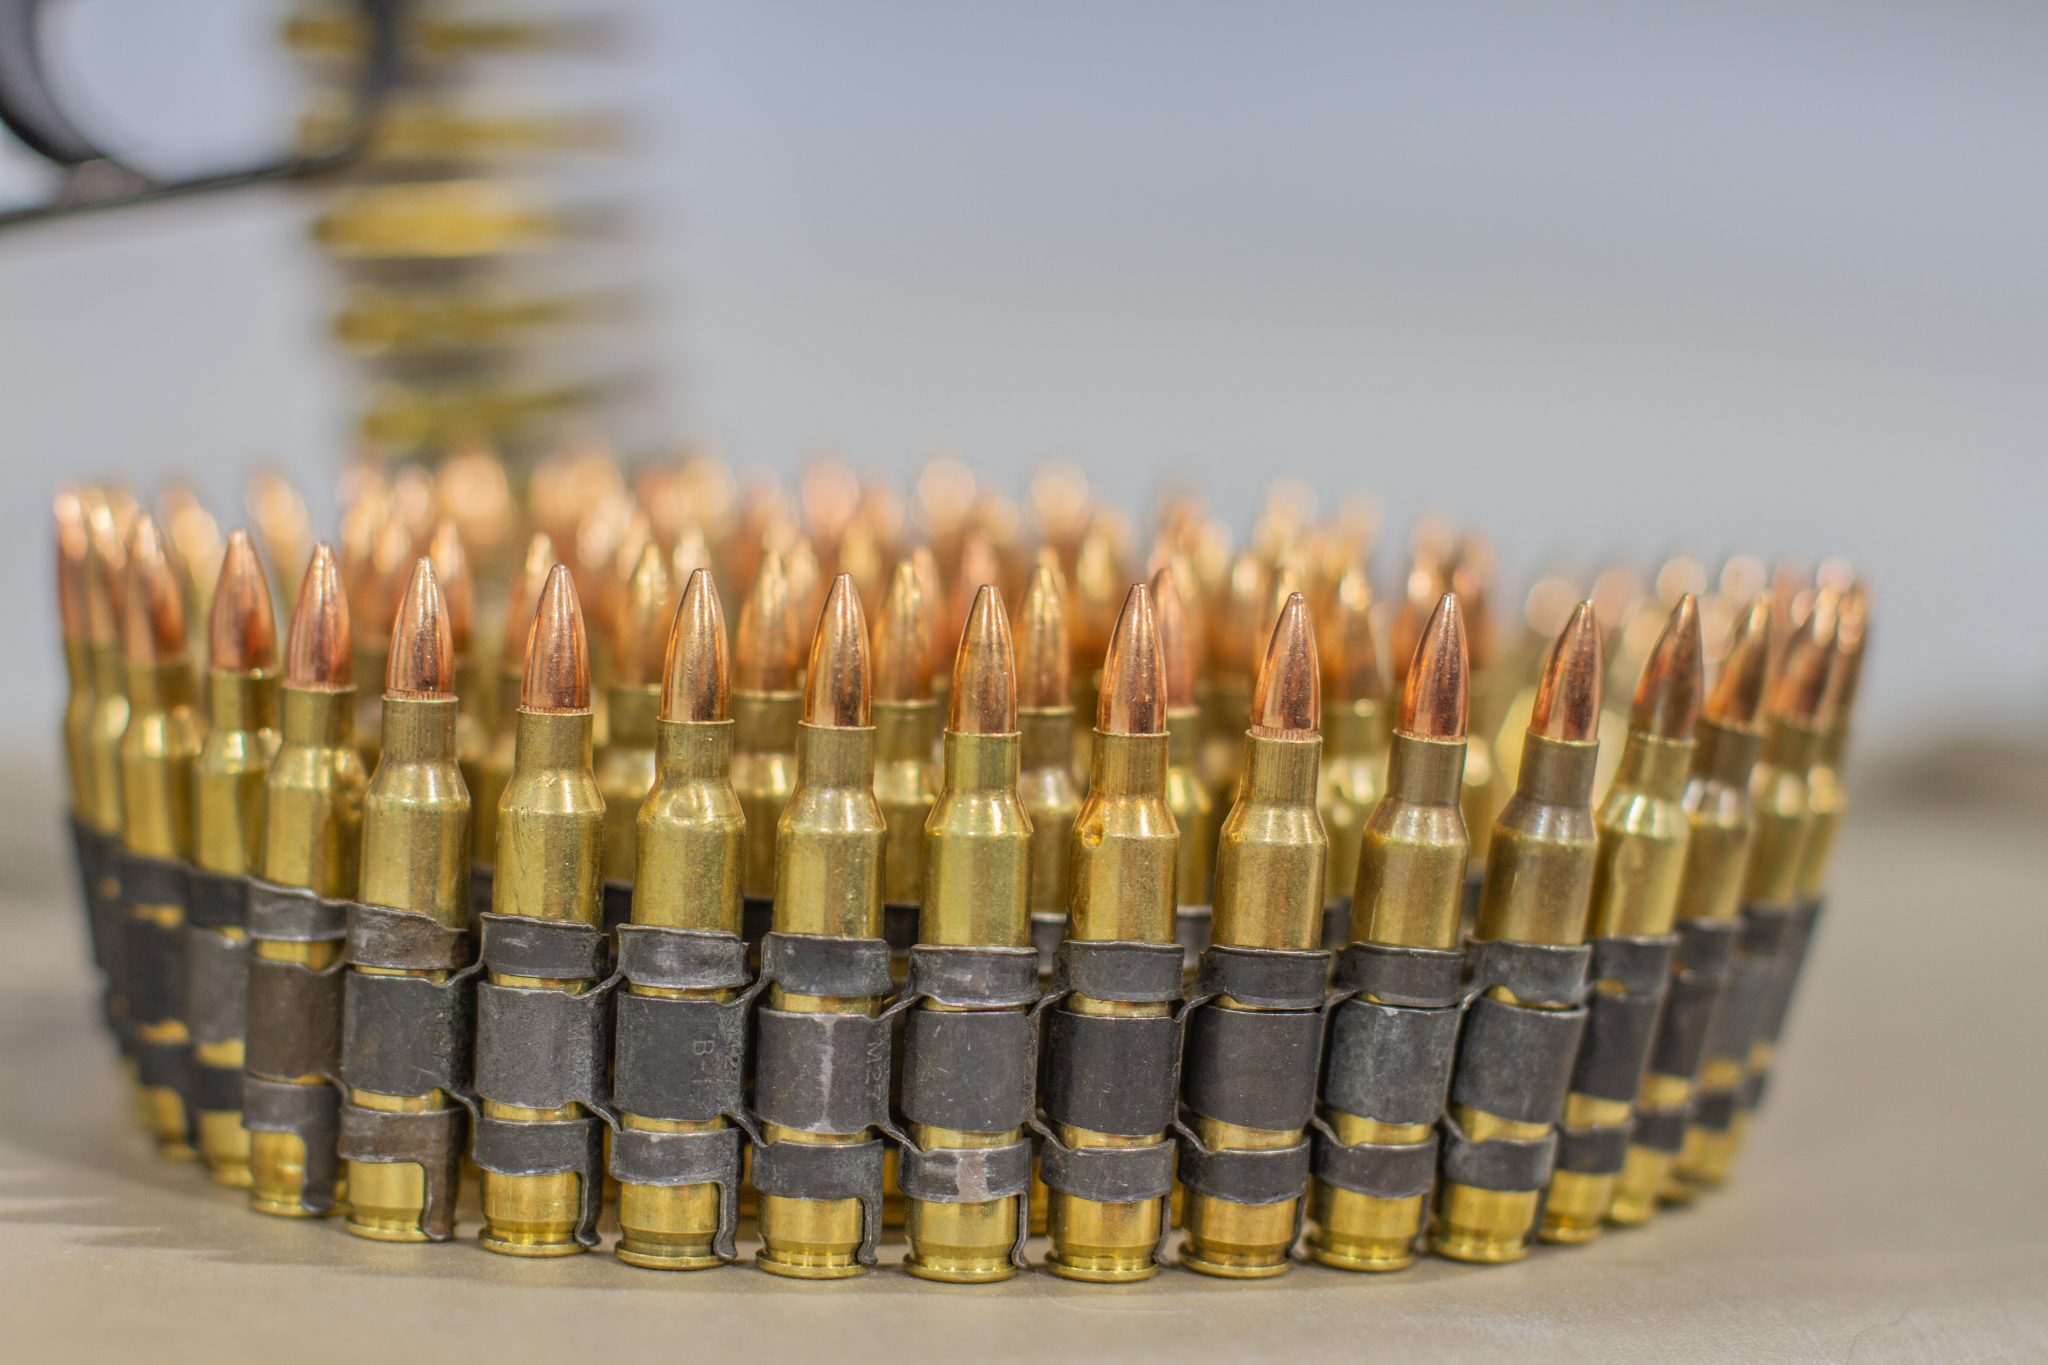 II. Understanding the Different Types of Ammo for Competitive Shooting